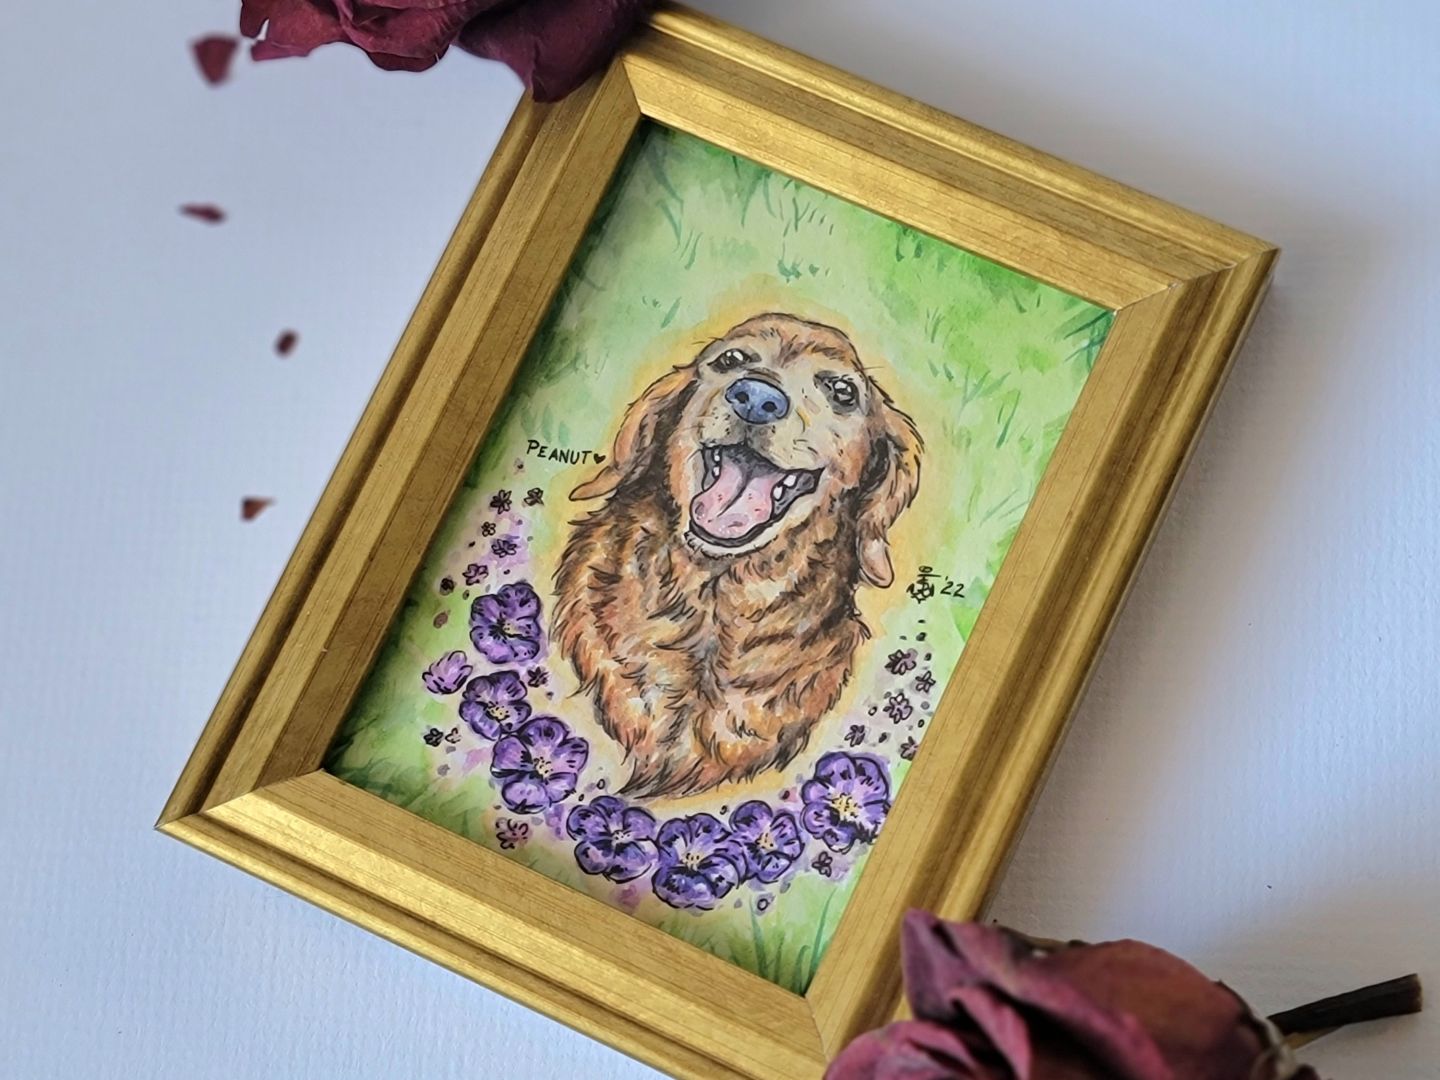 Dottie Novak Painted Portraits of Pets and Their People